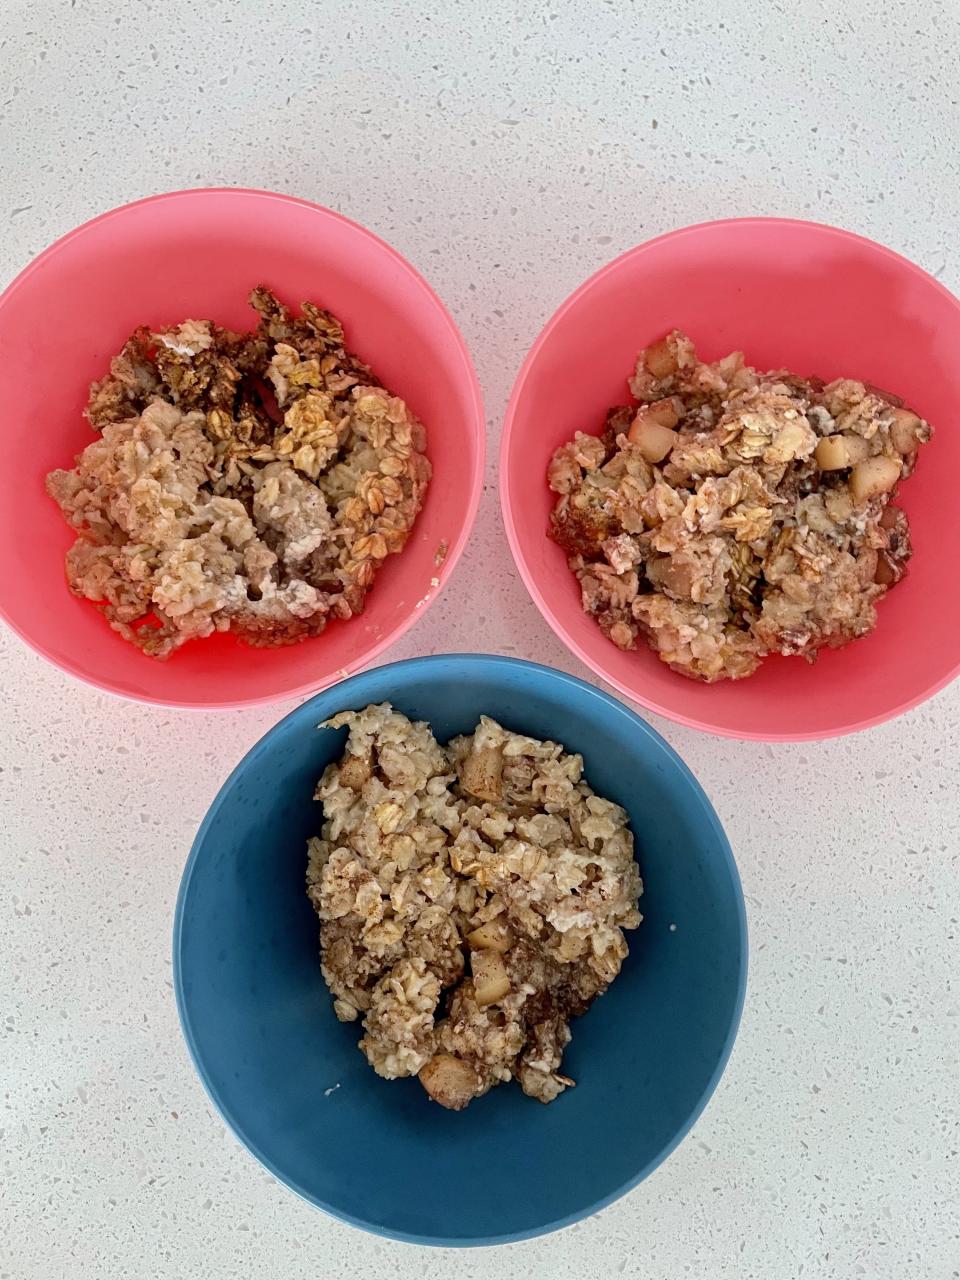 I find baked oatmeal to be such a good substitute for flavored instant oatmeal. You can use a variety of fruit or toppings to create or customize tons of flavors — often for cheaper than the pre-made or instant kind.